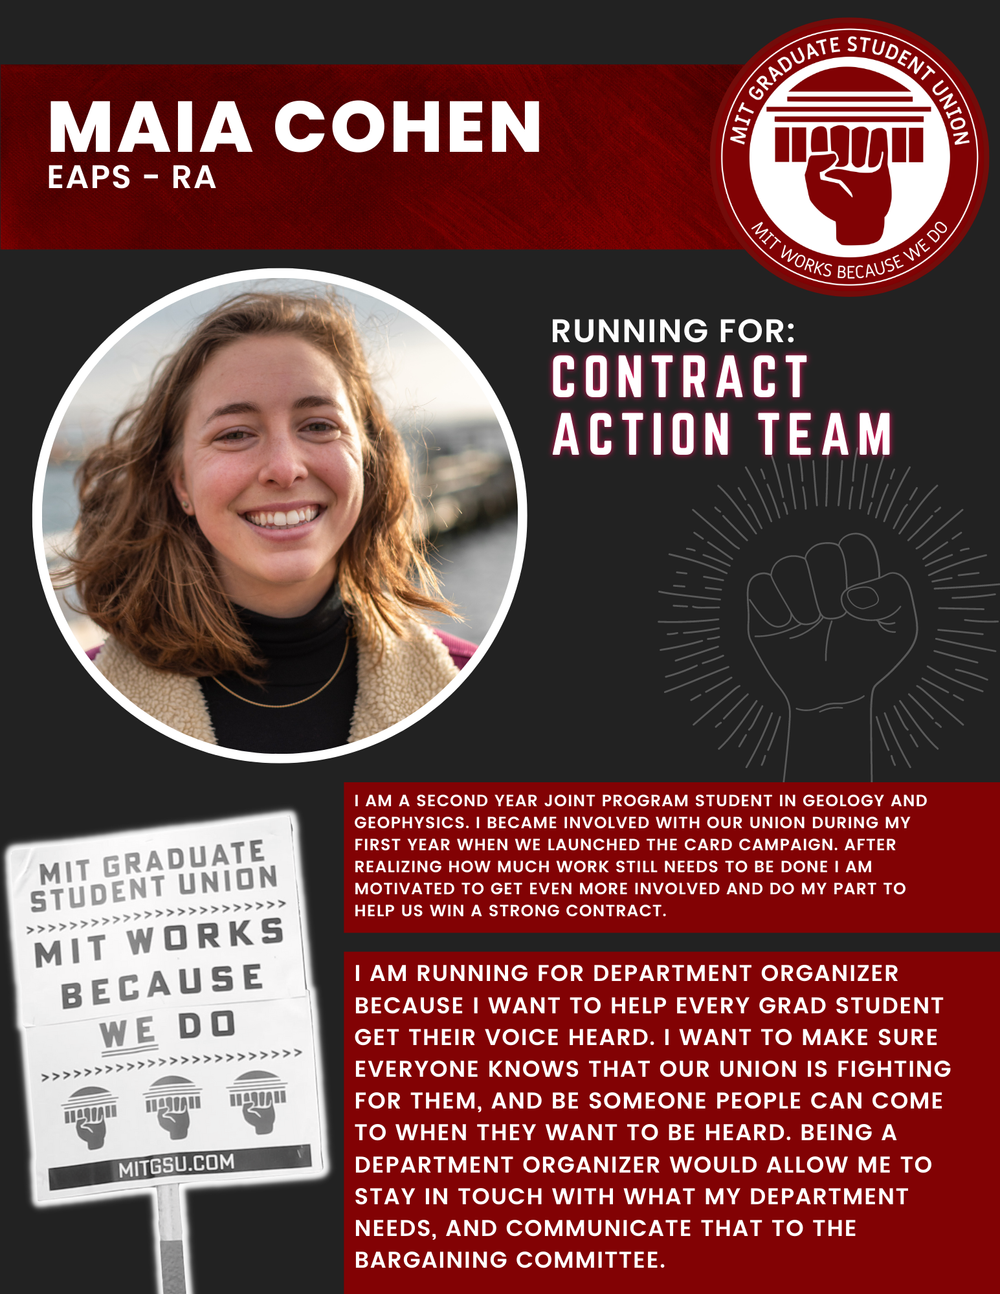  MAIA COHEN EAPS - RA   RUNNING FOR: Contract Action Team  I AM A SECOND YEAR JOINT PROGRAM STUDENT IN GEOLOGY AND GEOPHYSICS. I BECAME INVOLVED WITH OUR UNION DURING MY FIRST YEAR WHEN WE LAUNCHED THE CARD CAMPAIGN. AFTER REALIZING HOW MUCH WORK STI